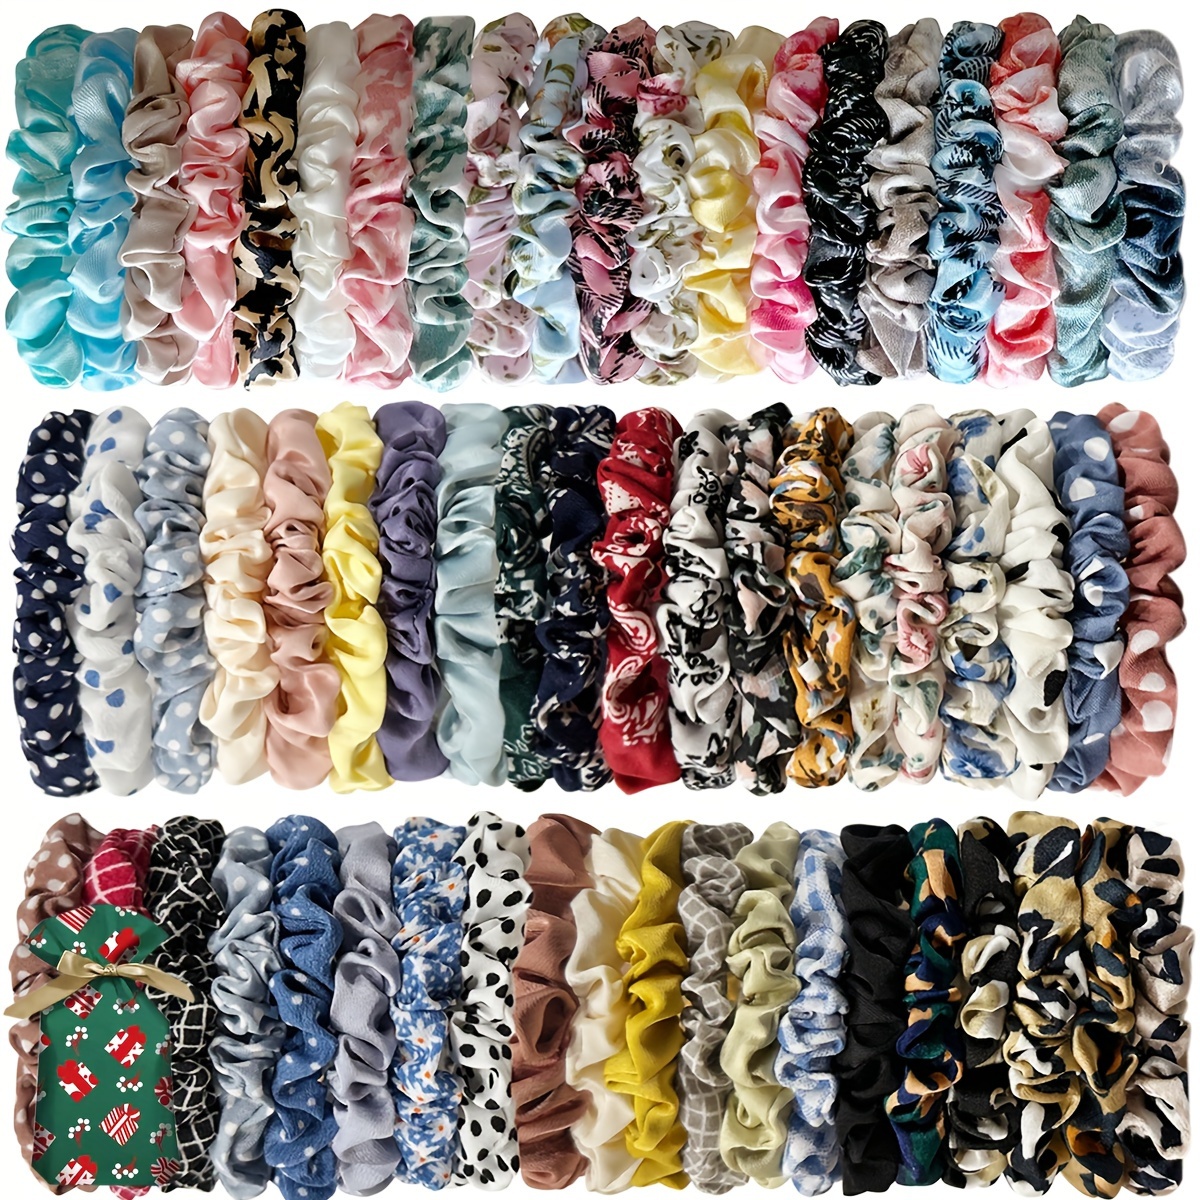 

60pcs Women Elastic Hair Scrunchies For Women Hair Ties Rubber Band Hair Rope Accessories Set For Christmas